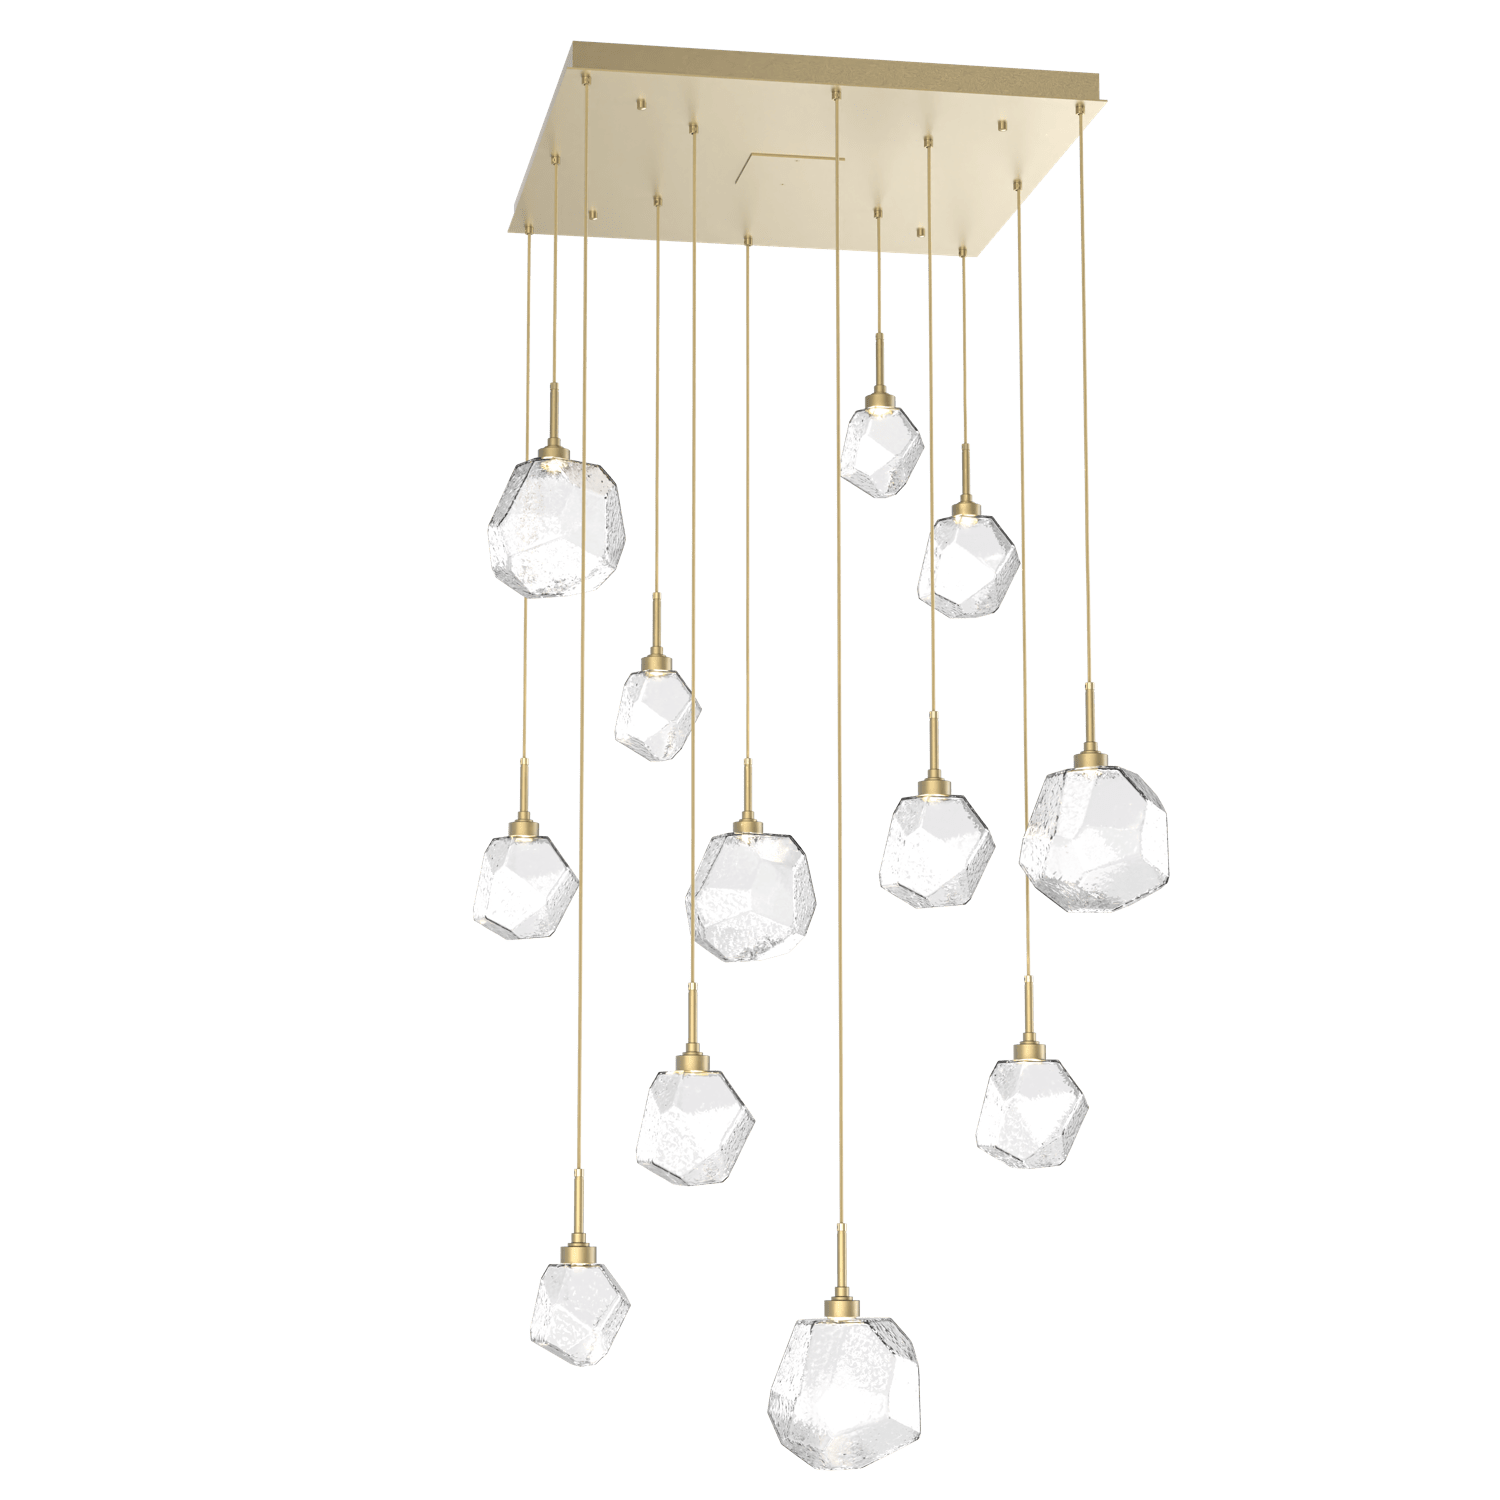 CHB0039-12-GB-C-Hammerton-Studio-Gem-12-light-square-pendant-chandelier-with-gilded-brass-finish-and-clear-blown-glass-shades-and-LED-lamping